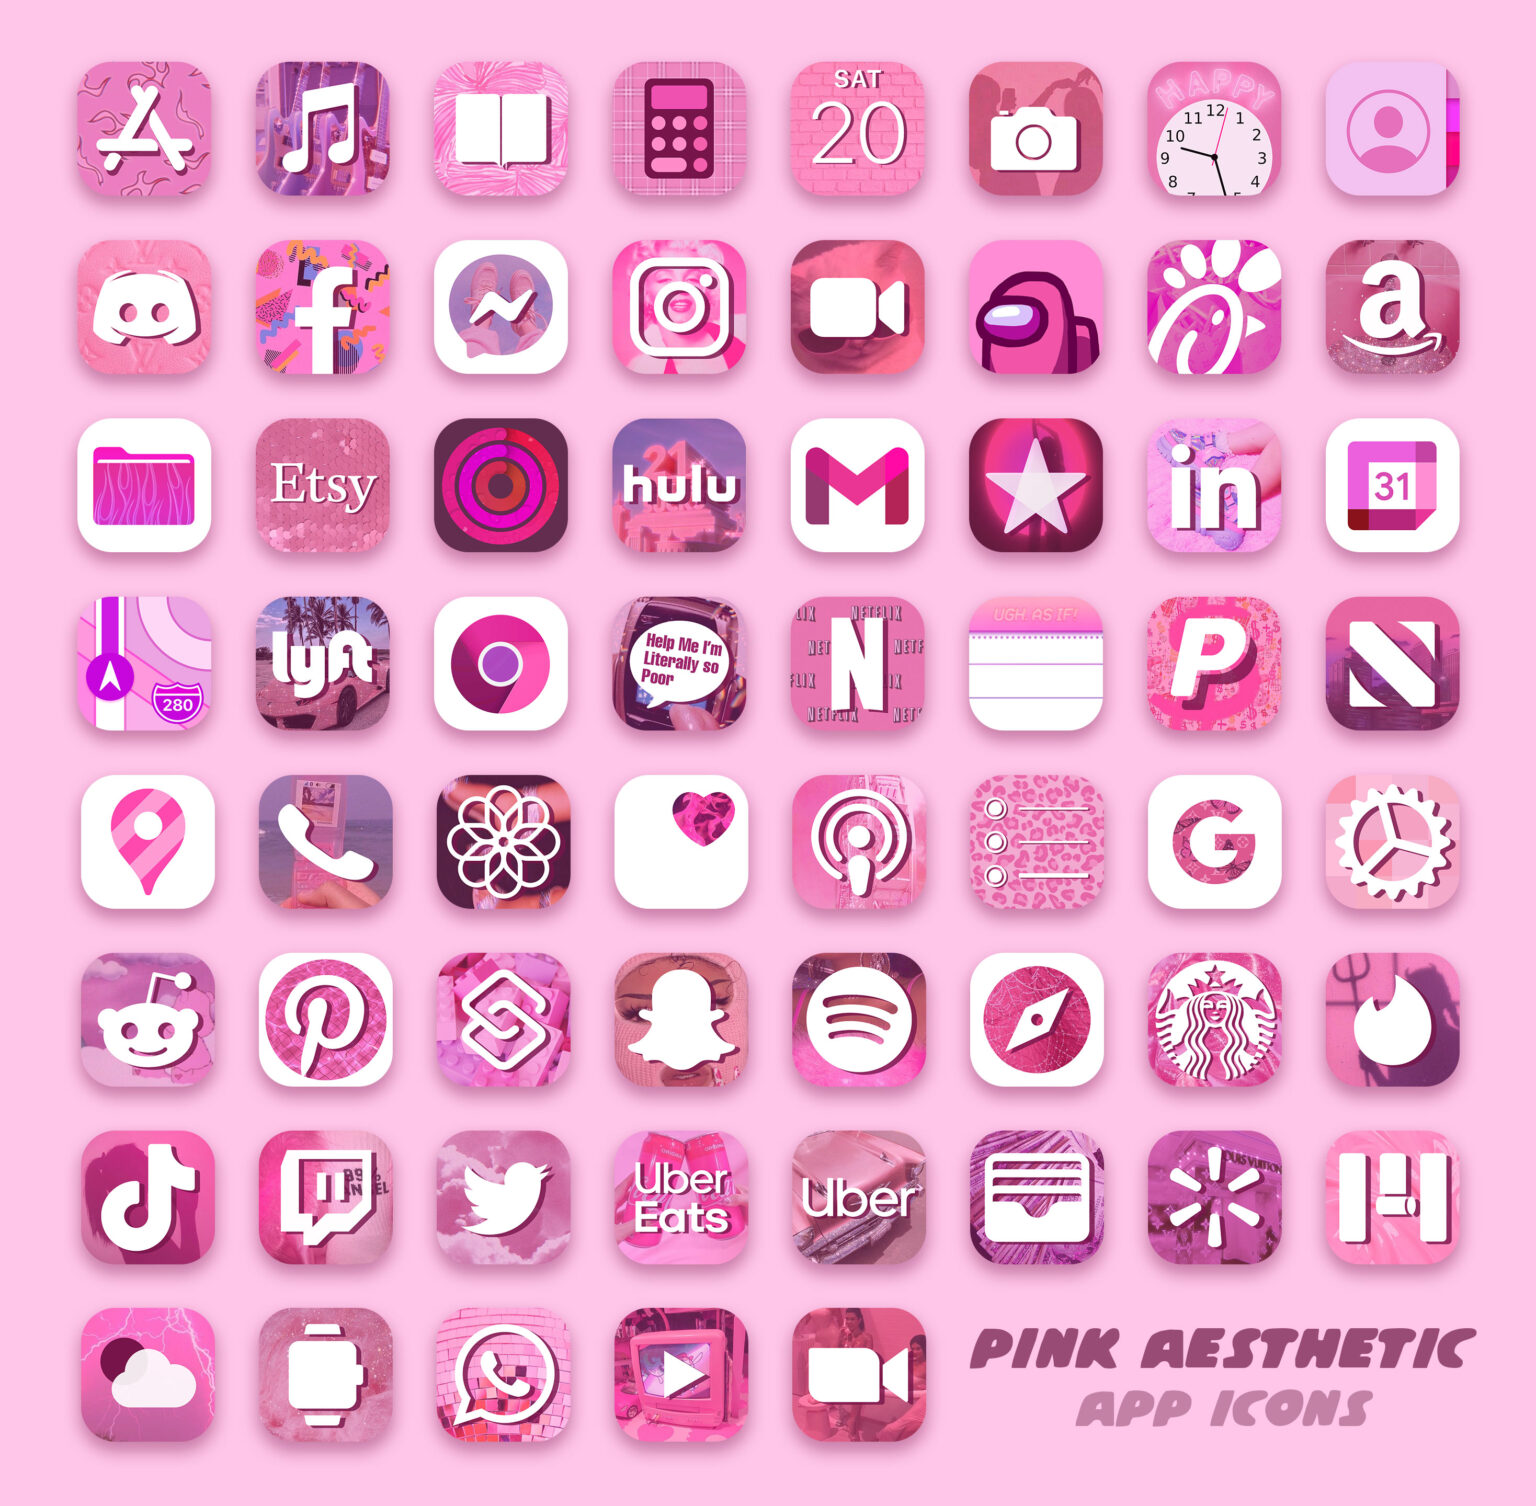 shortcuts icon aesthetic